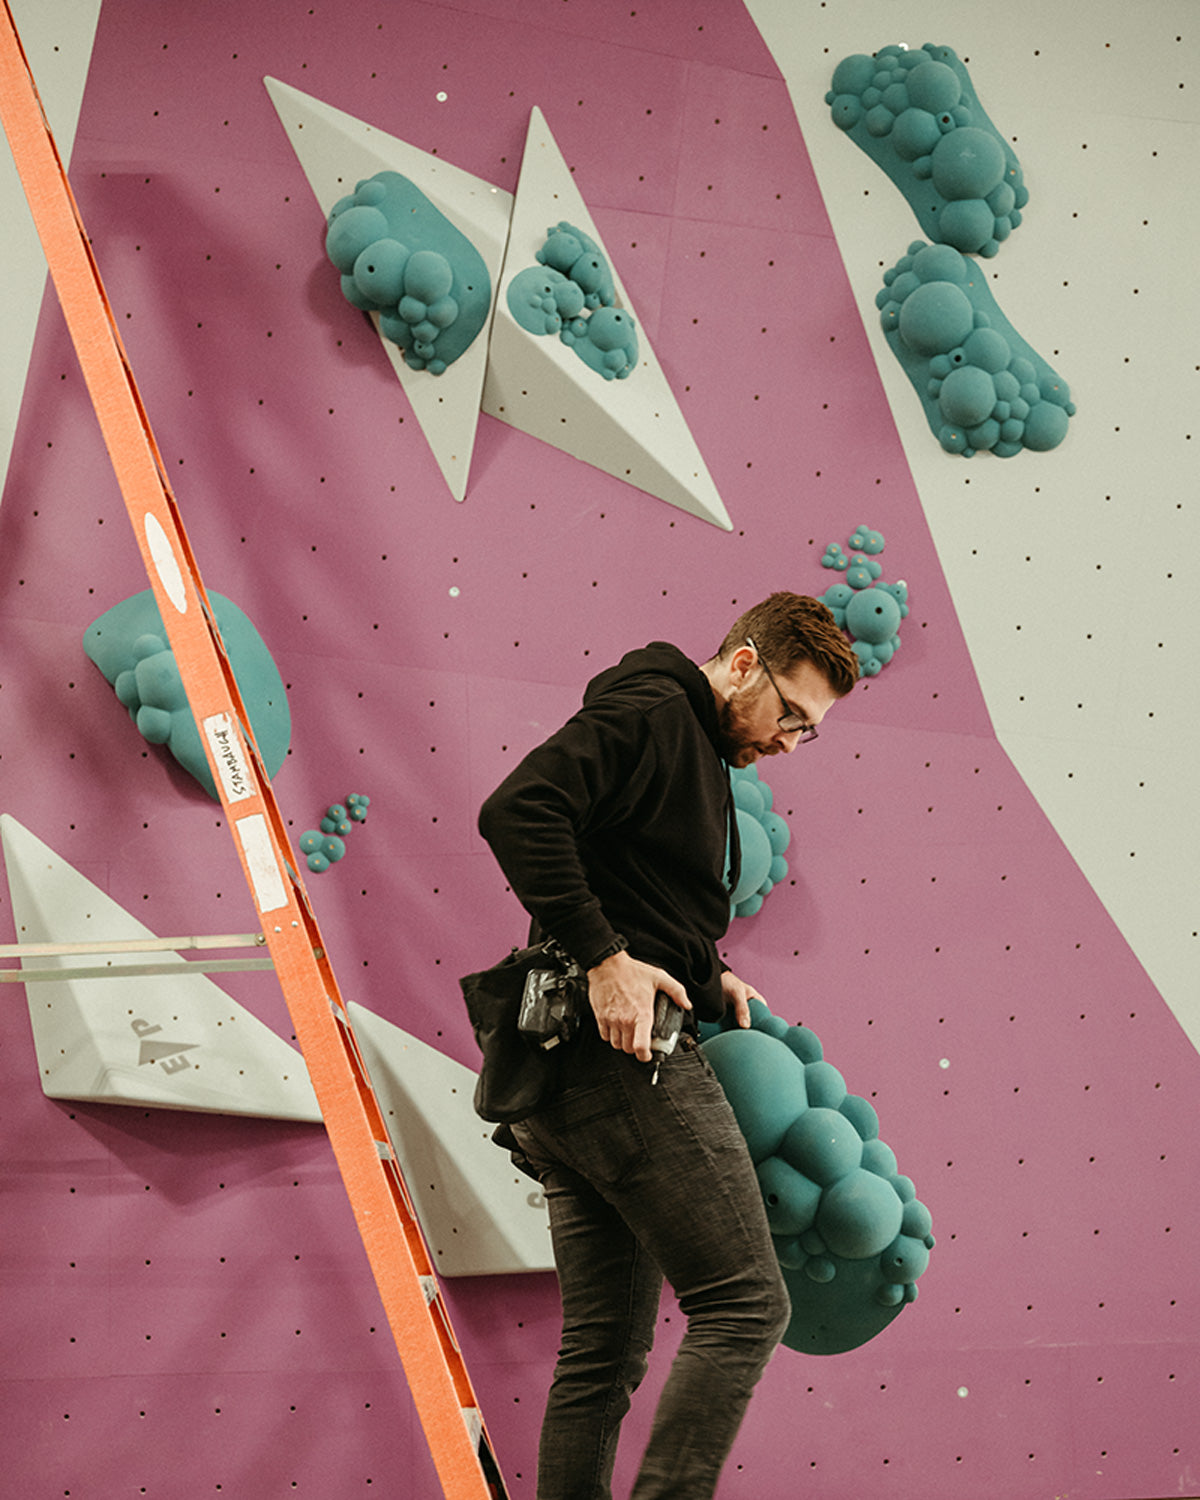 miles west puts up a climbing route with the so ill roids